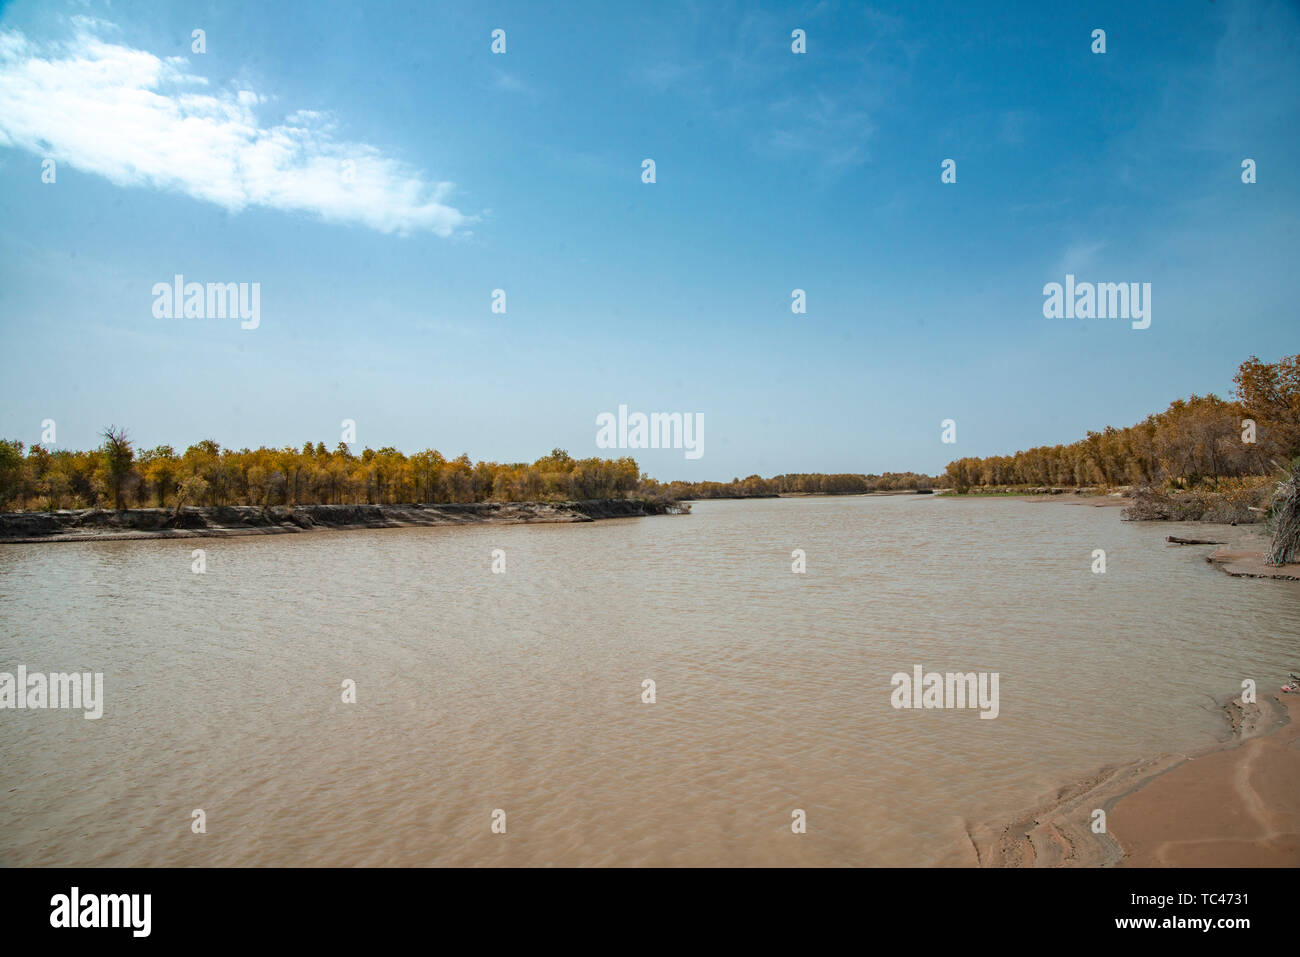 The River In The Desert Stock Photo Alamy